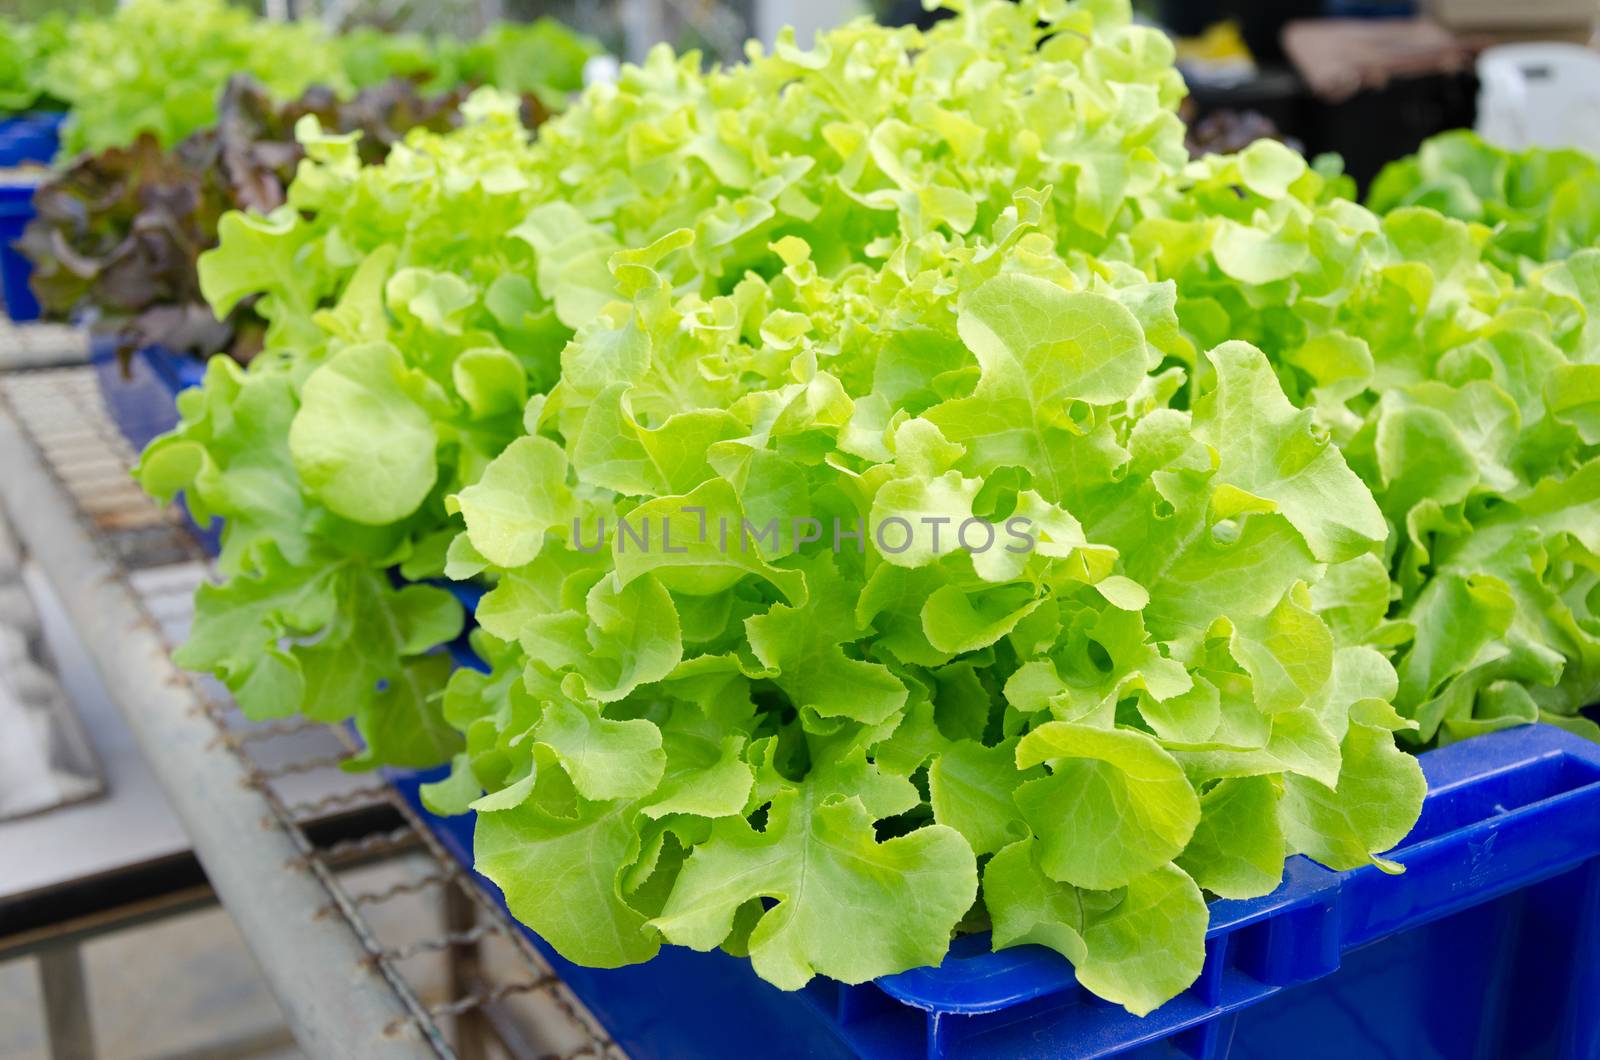 HYDROPONIC vegetables grown in blue plastic containers.